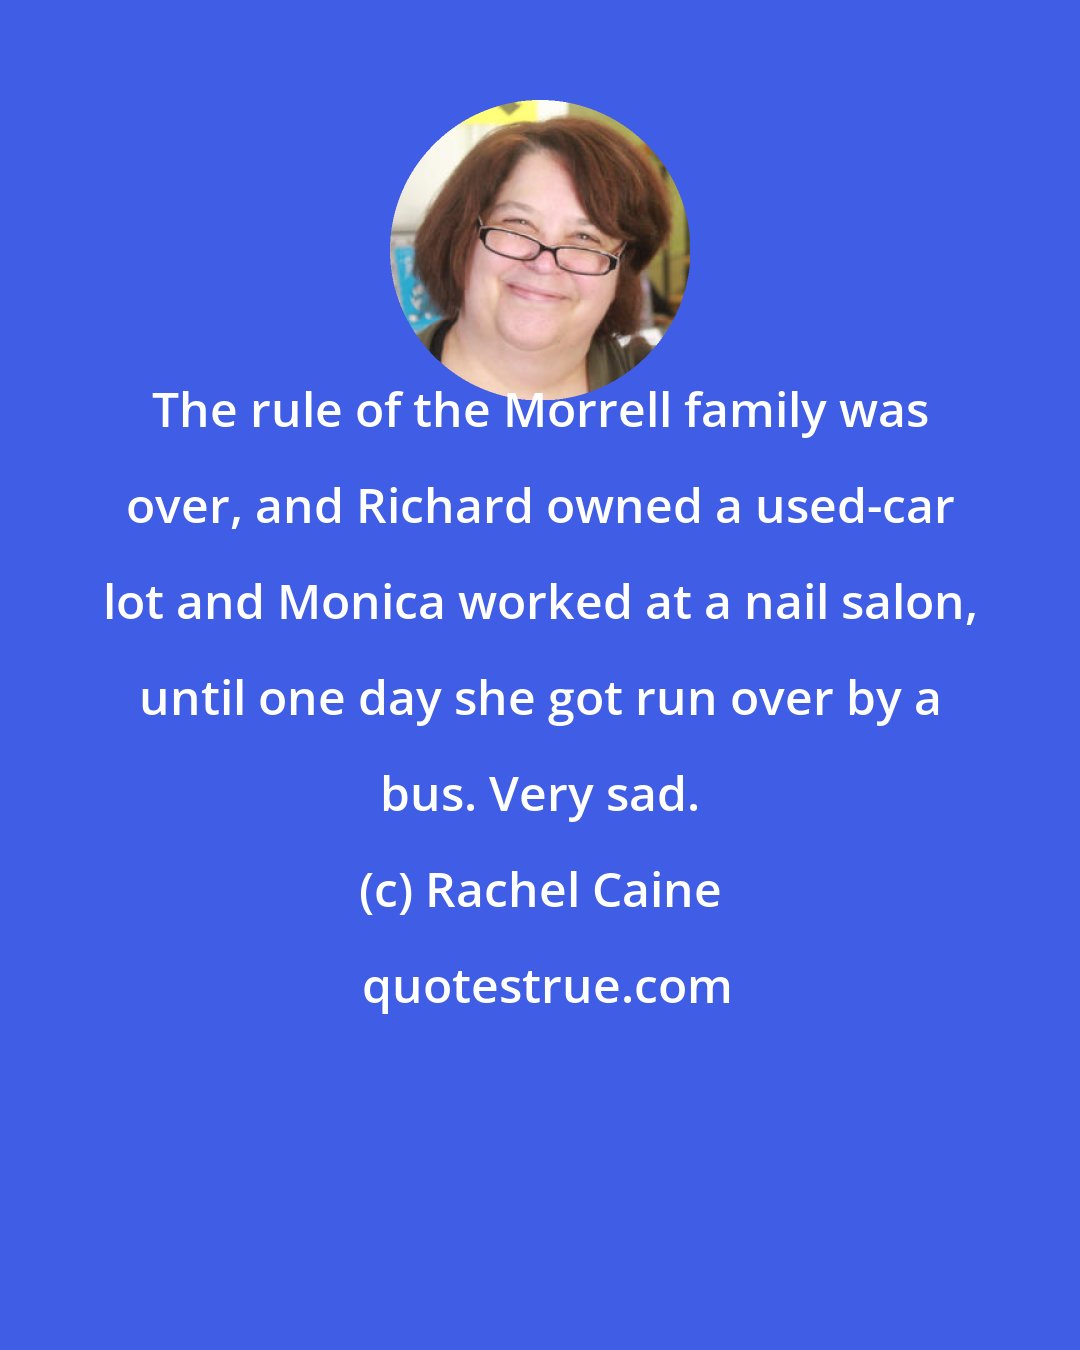 Rachel Caine: The rule of the Morrell family was over, and Richard owned a used-car lot and Monica worked at a nail salon, until one day she got run over by a bus. Very sad.